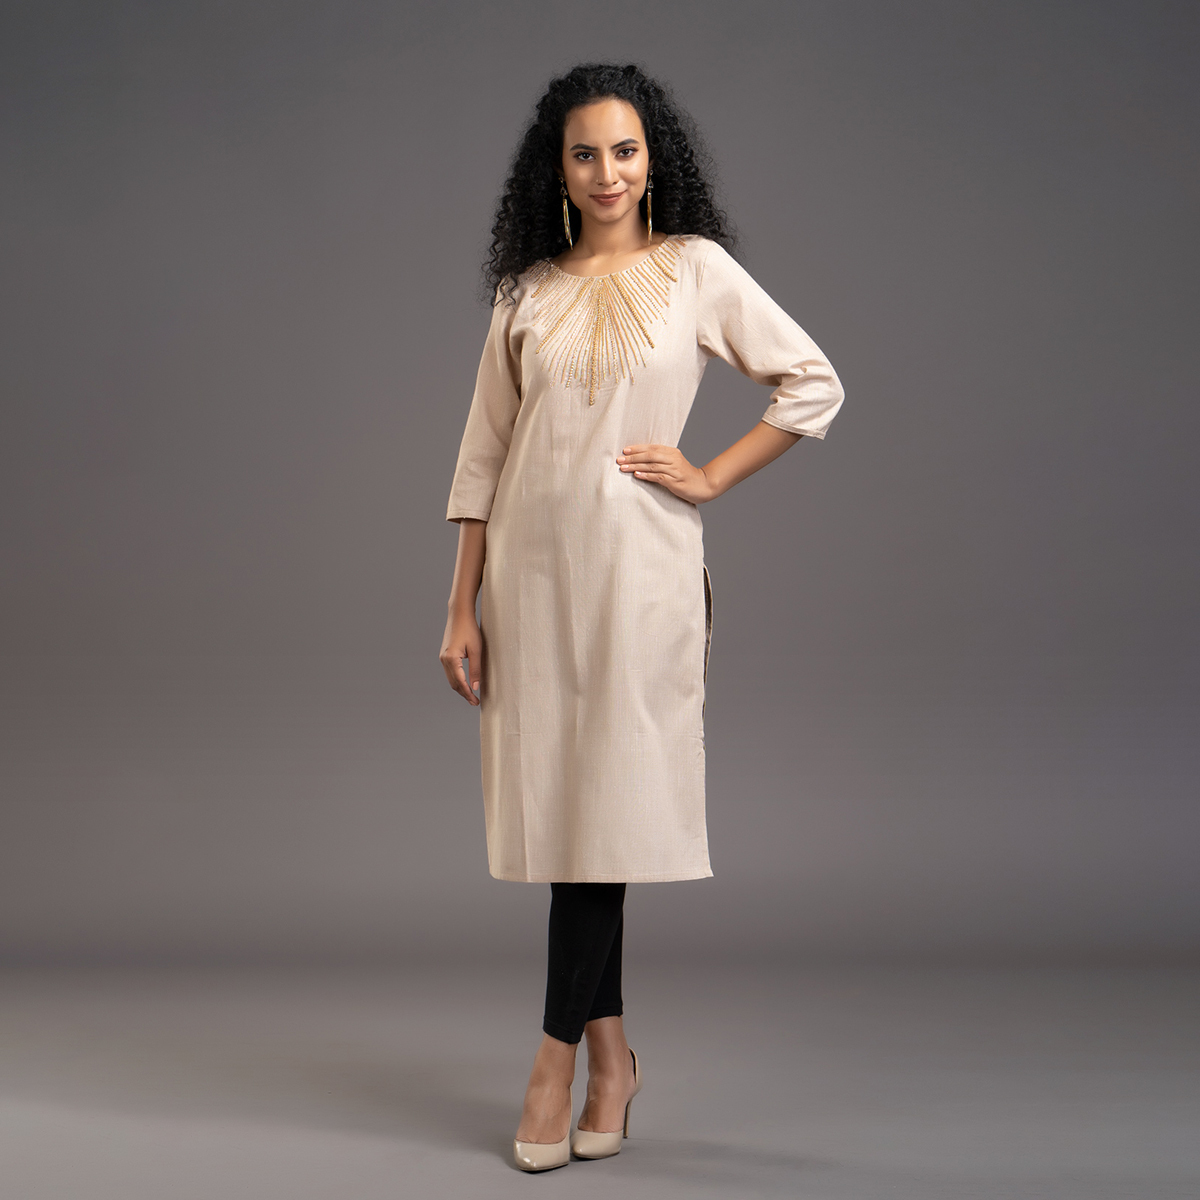 Zella Solid Color Hand Loom Cotton Staright cut kurta with Scattered Embellishments on Yoke - Cream